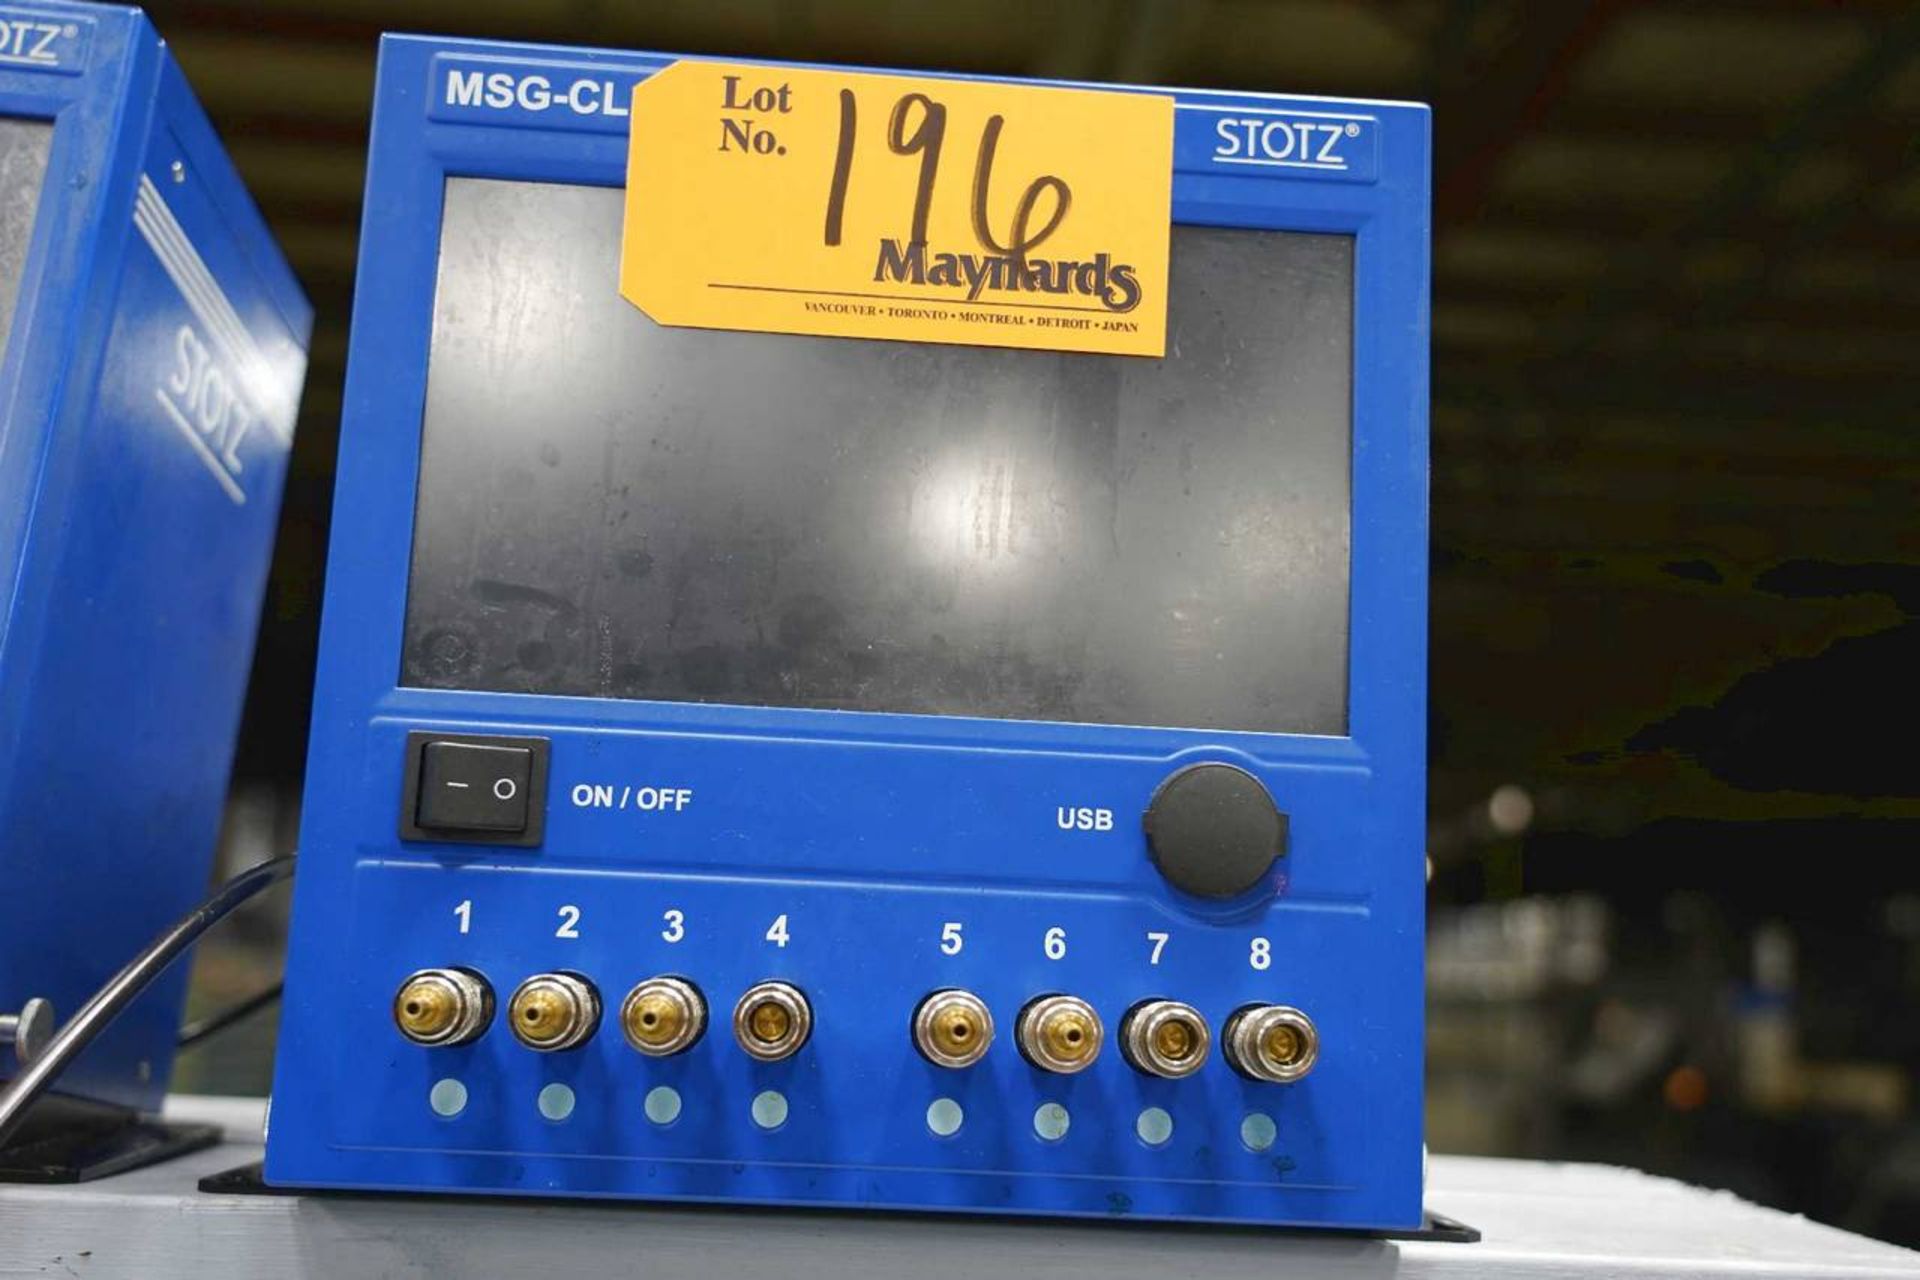 Stotz MSG-CL Pneumatic and Electronic Measuring Gage